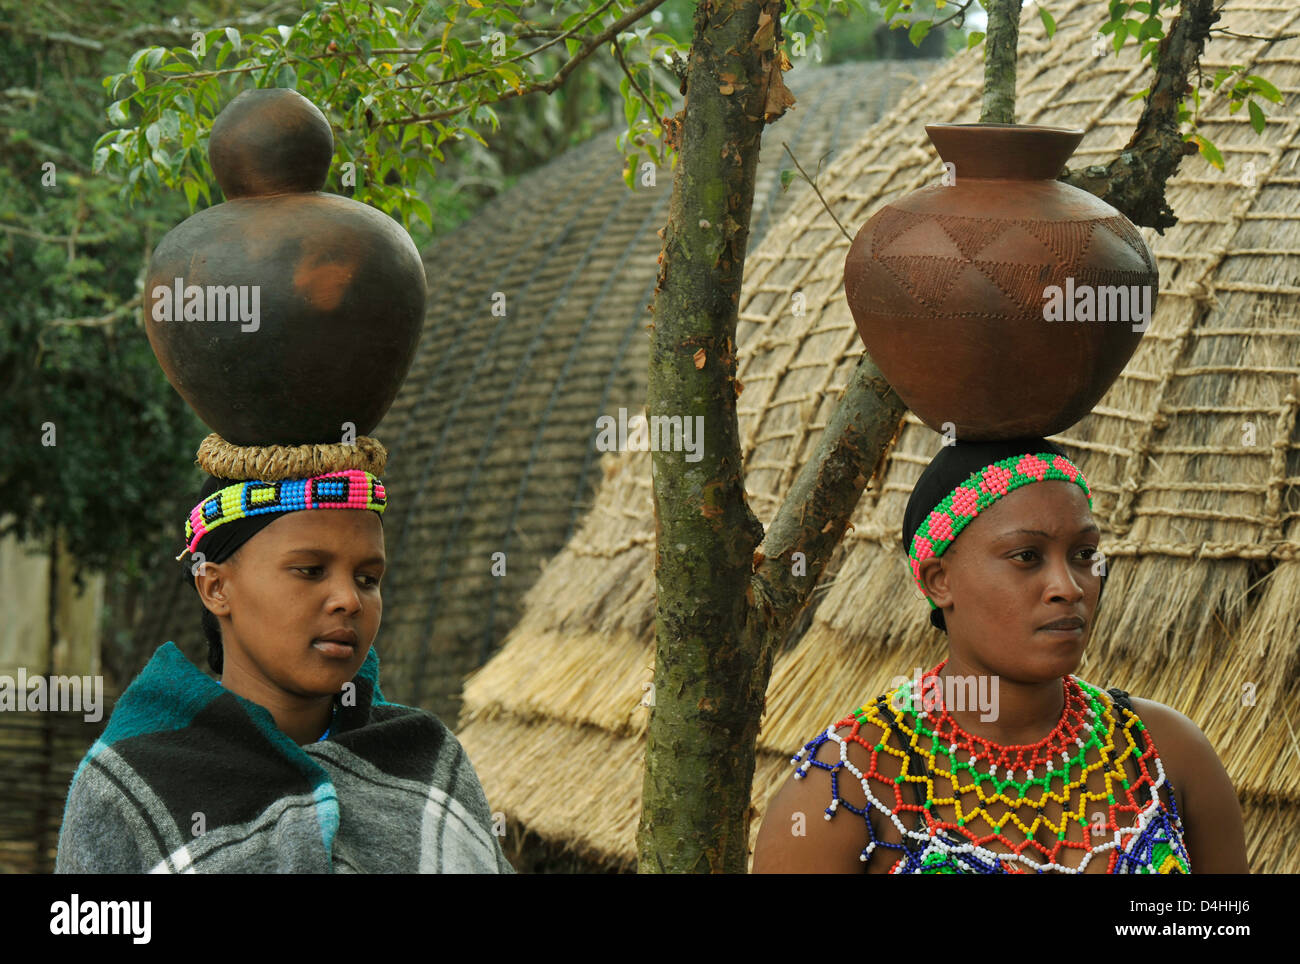 People, 2 maidens, two young Zulu woman in tradition clothes balancing clay pots on head, Shaka land, South Africa, ethnic, culture, friends Stock Photo